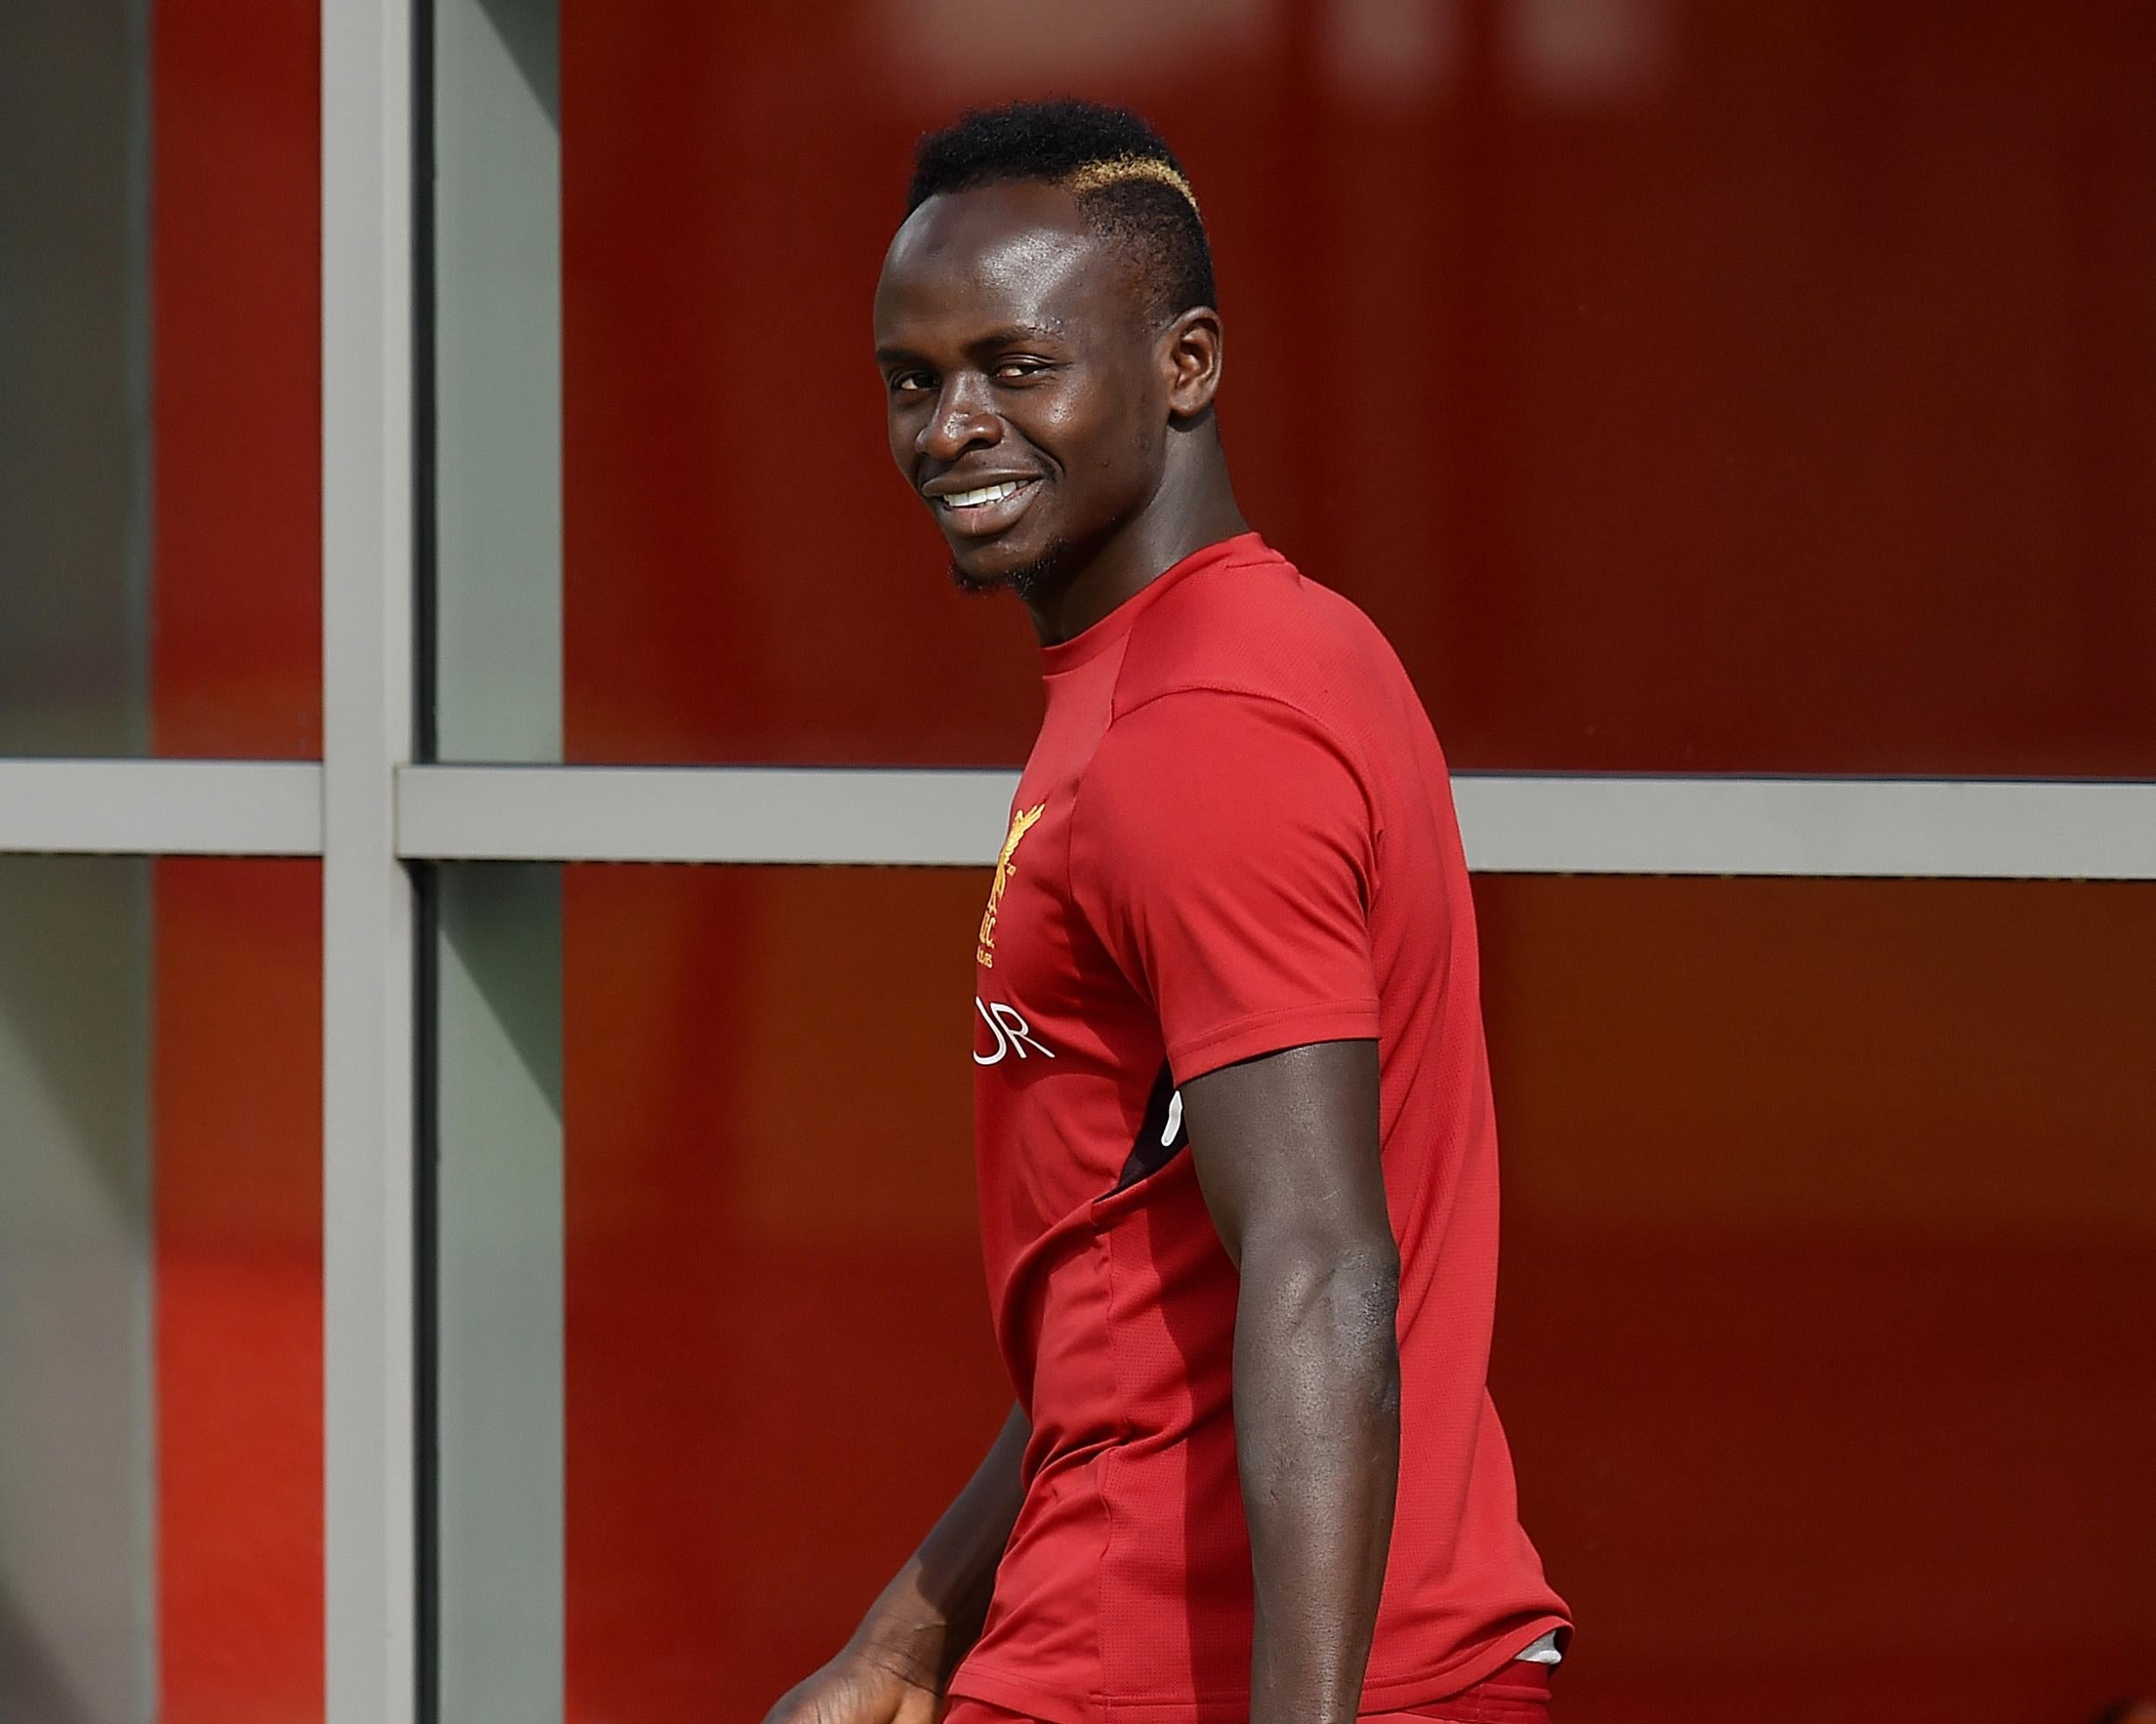 Sadio Mane has been in excellent form for the Reds this season